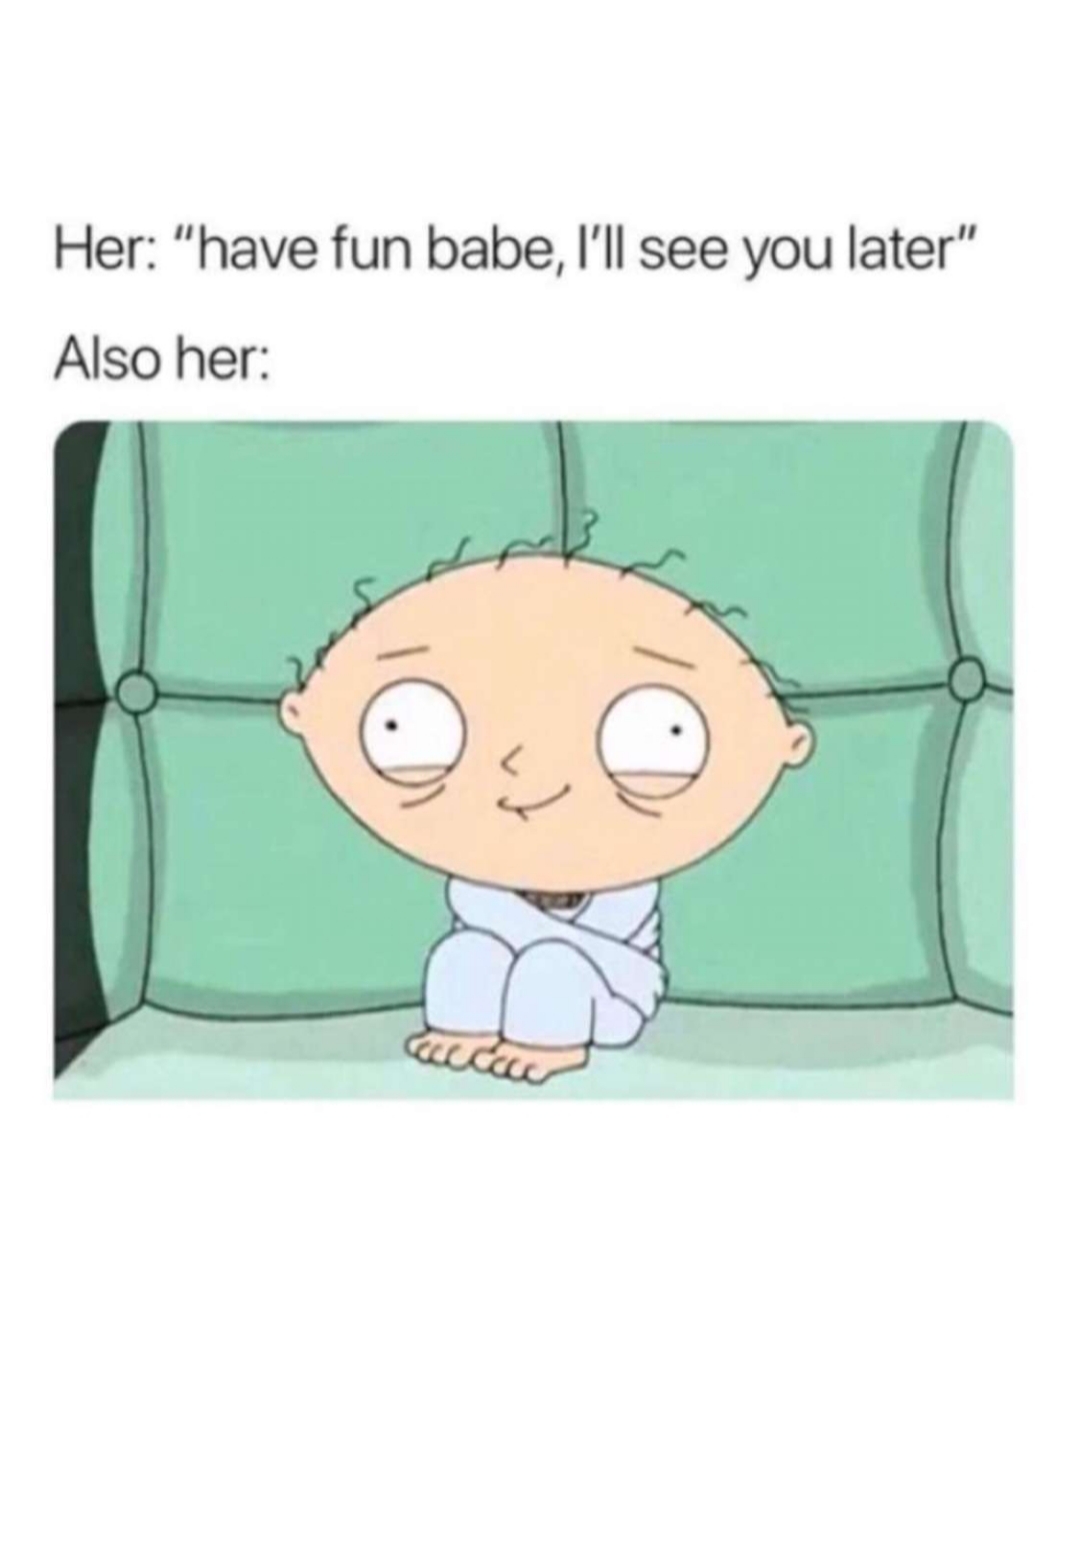 stewie griffin - Her "have fun babe, I'll see you later" Also her